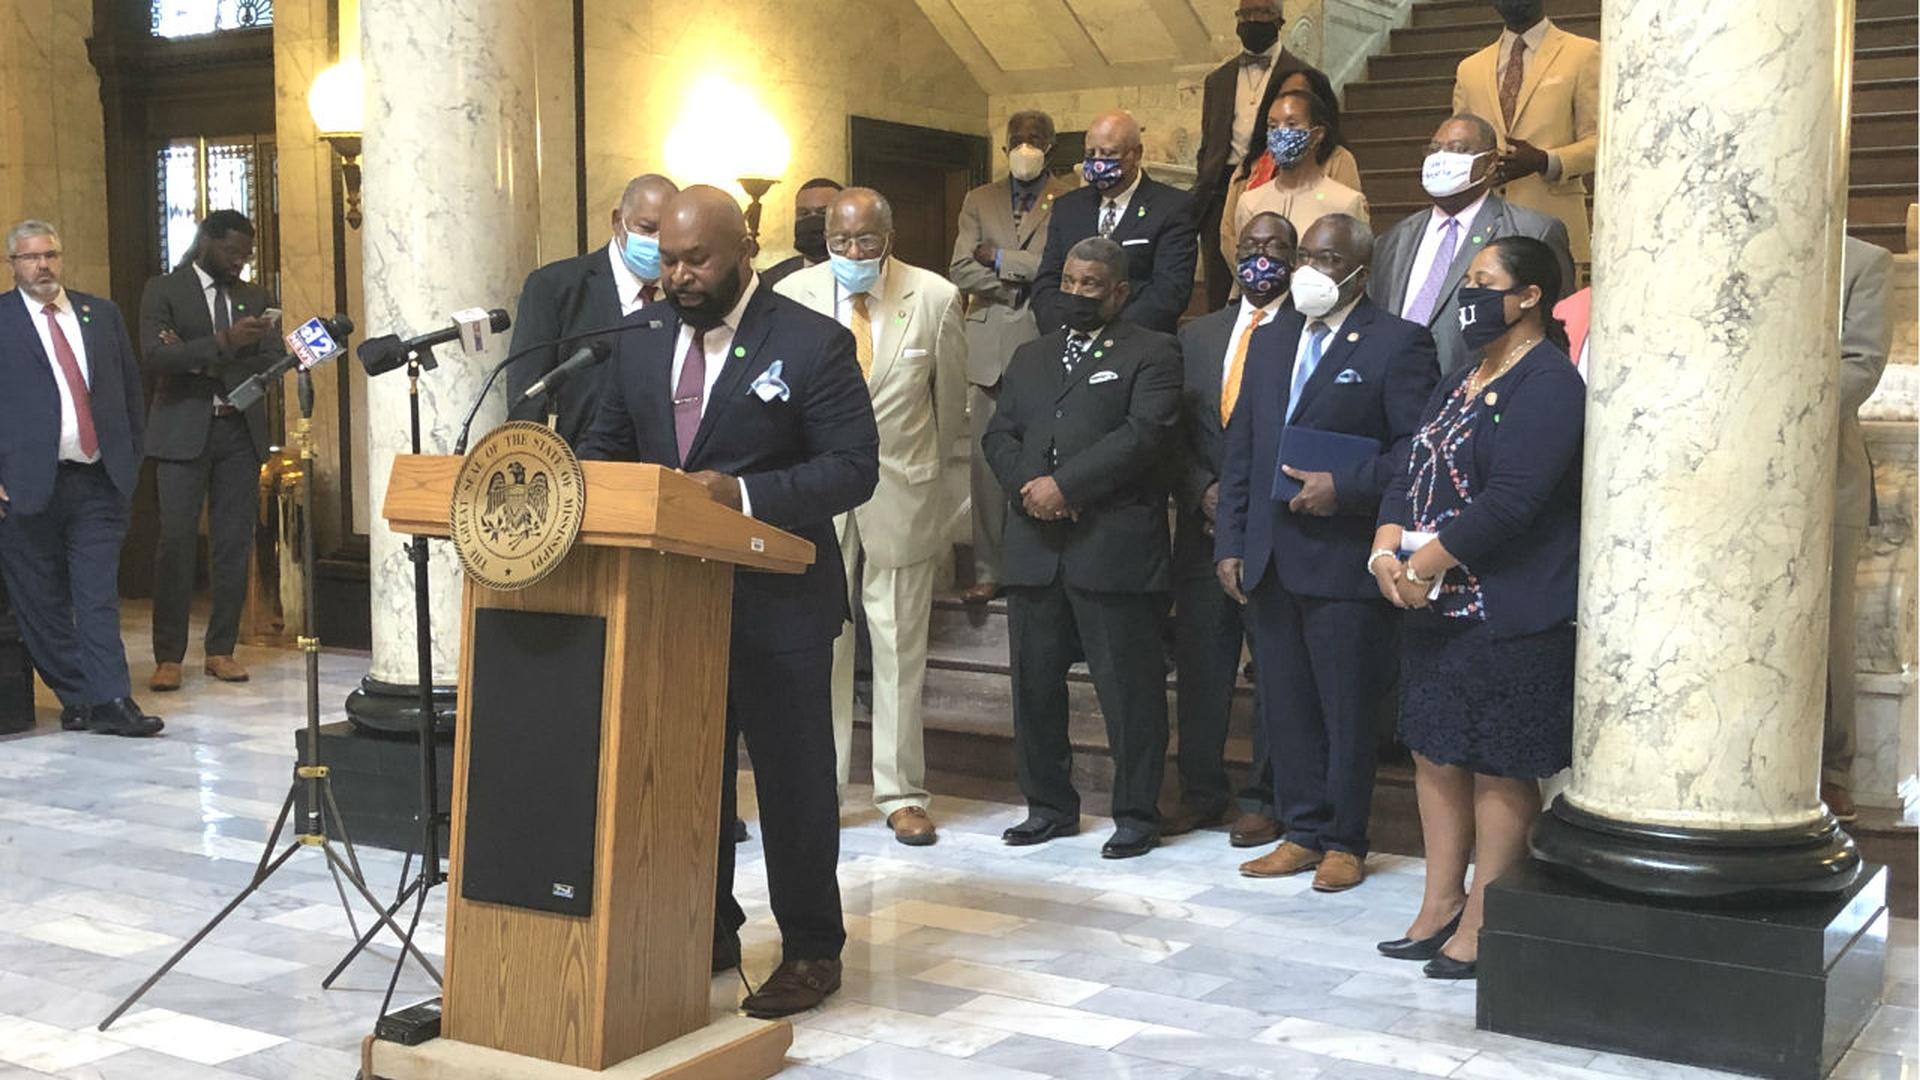 Black Caucus Speaks Out on Killing of Floyd and Moving State Forward